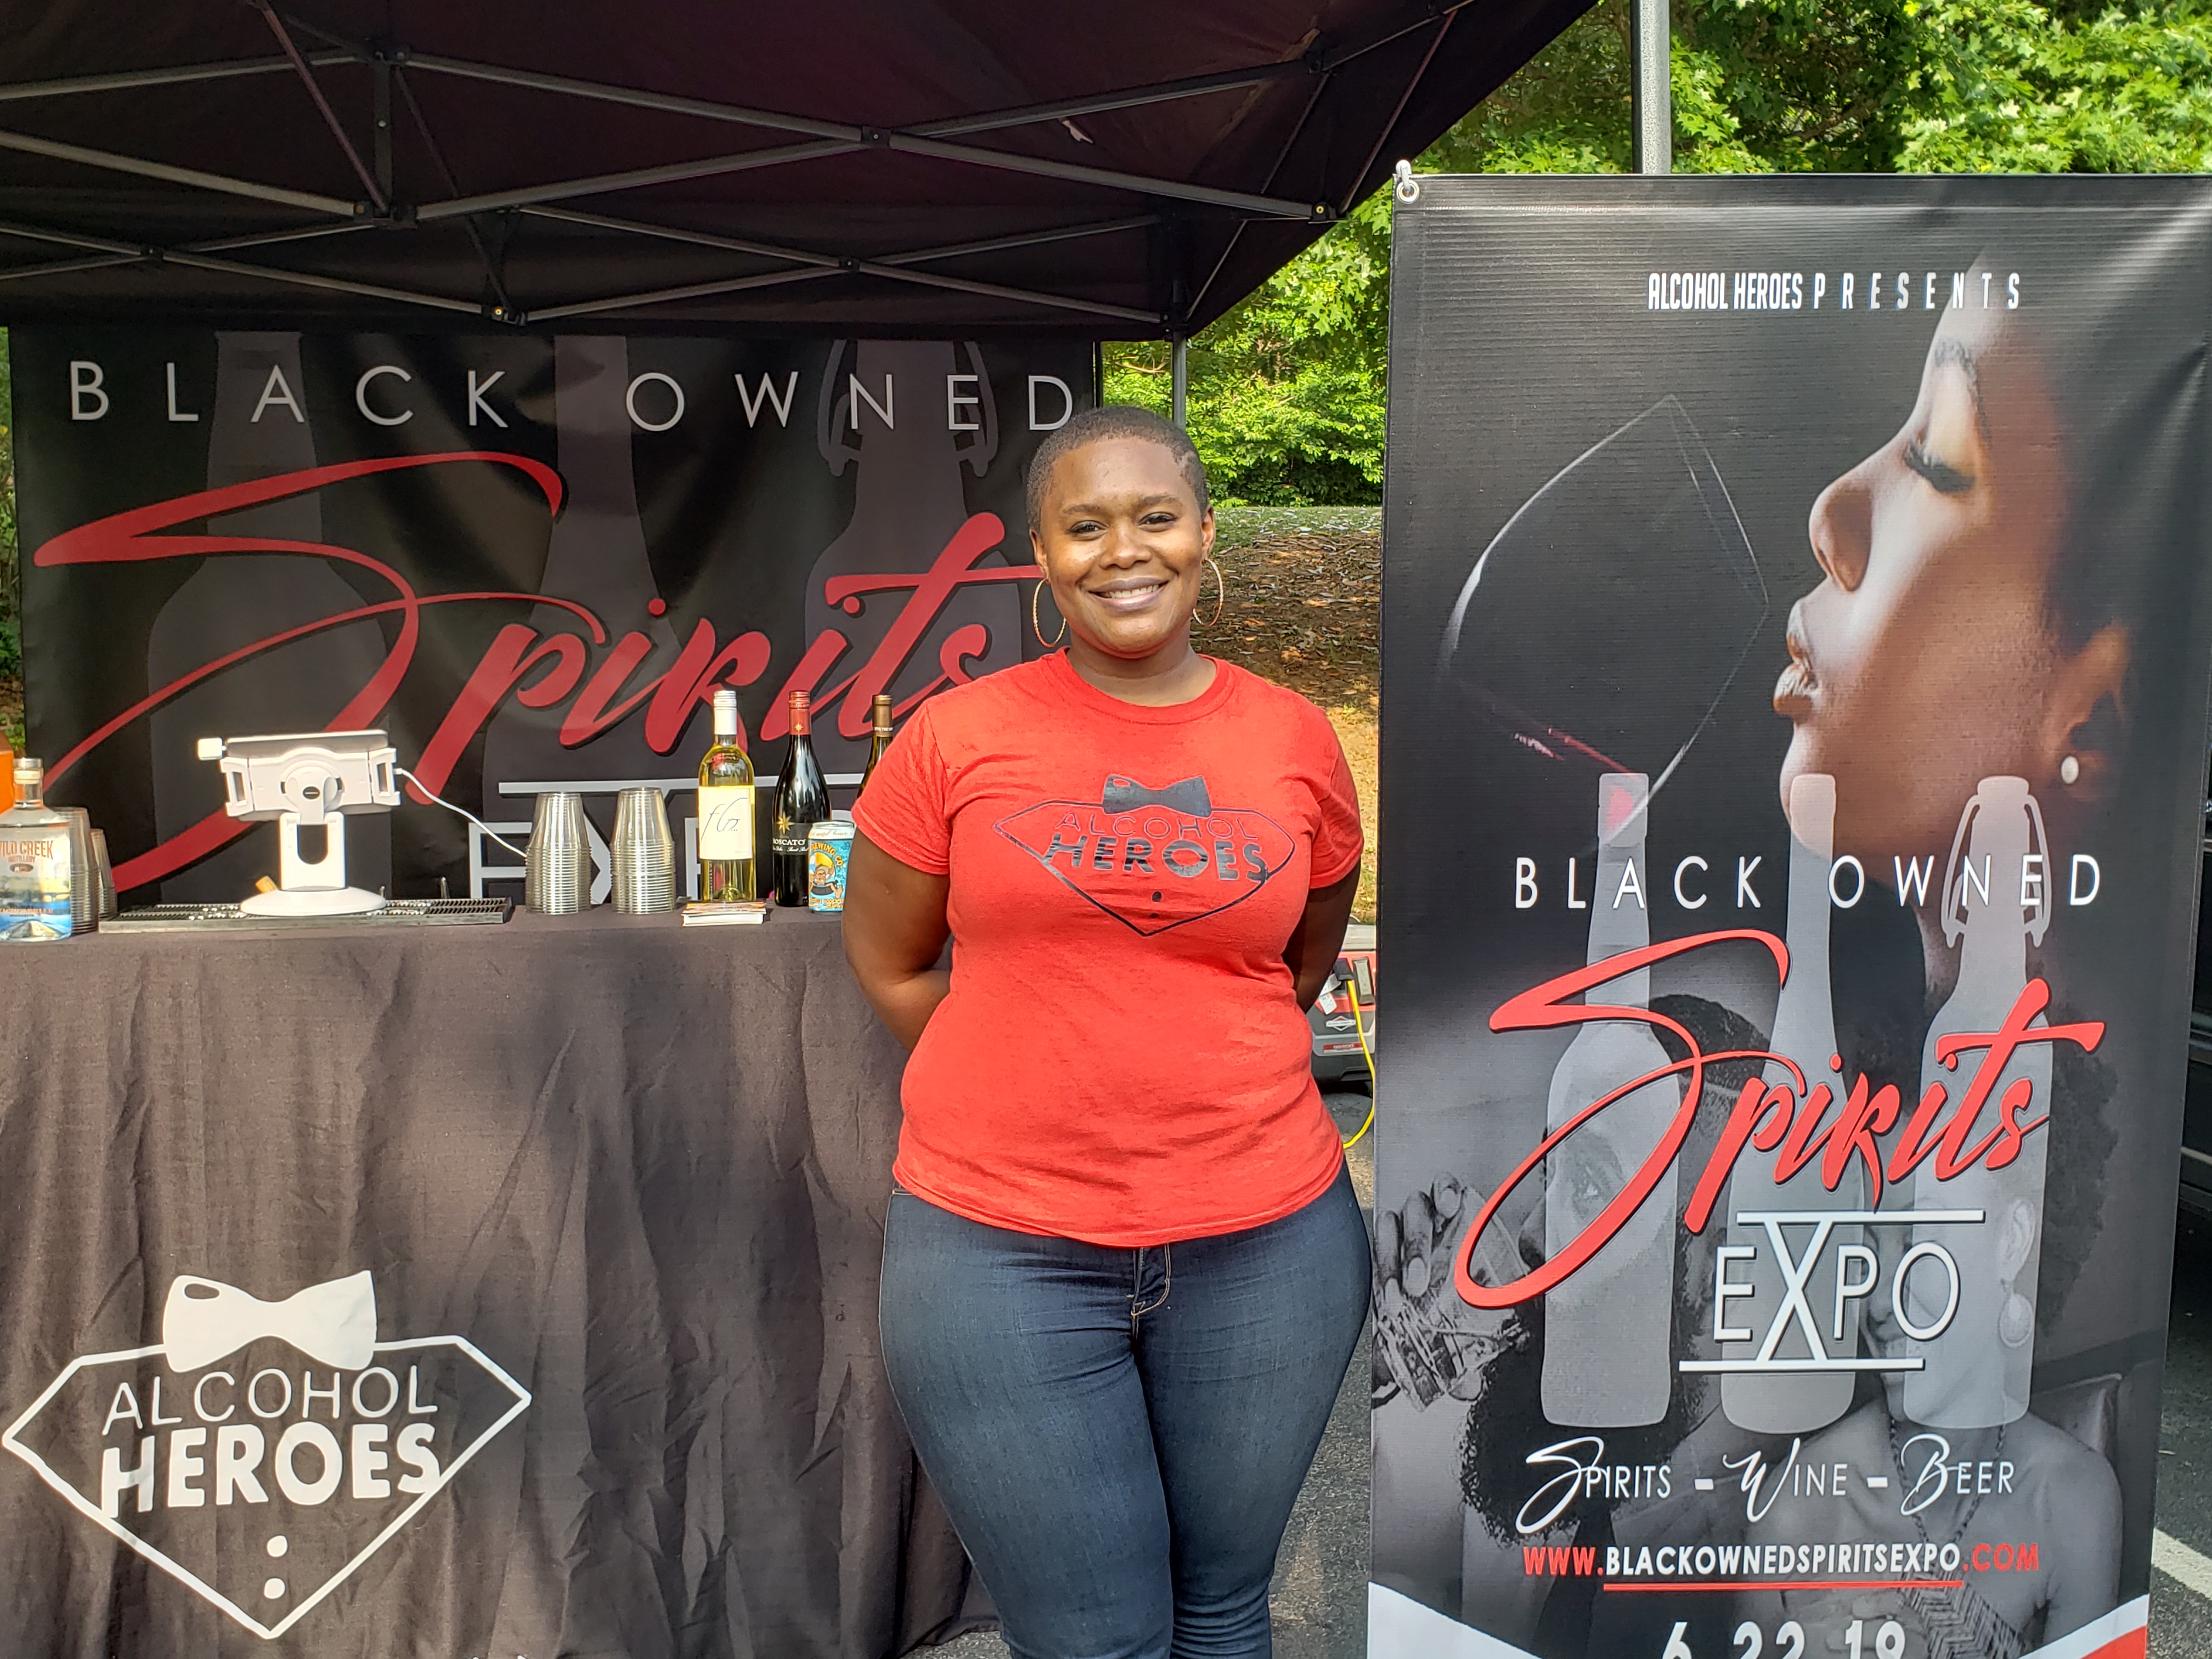 Food Festival Brings Black-Owned Spirits to South Fulton